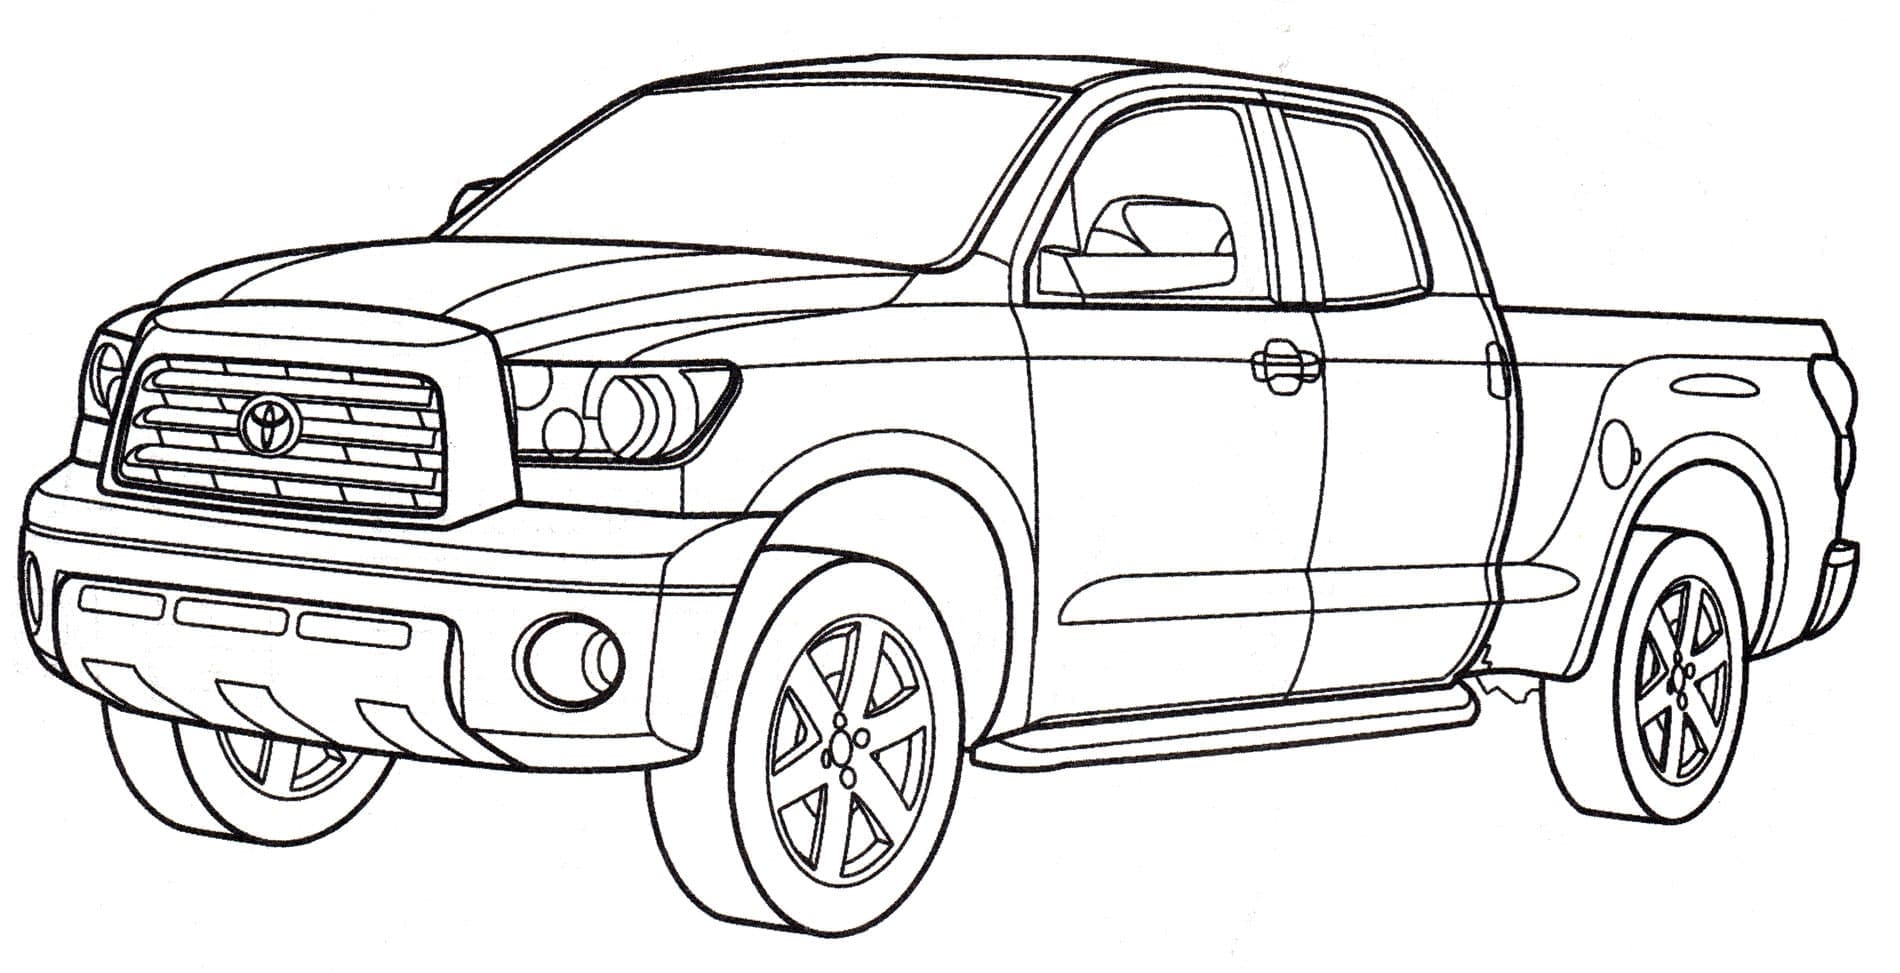 Toyota coloring pages printable coloring pages for kids